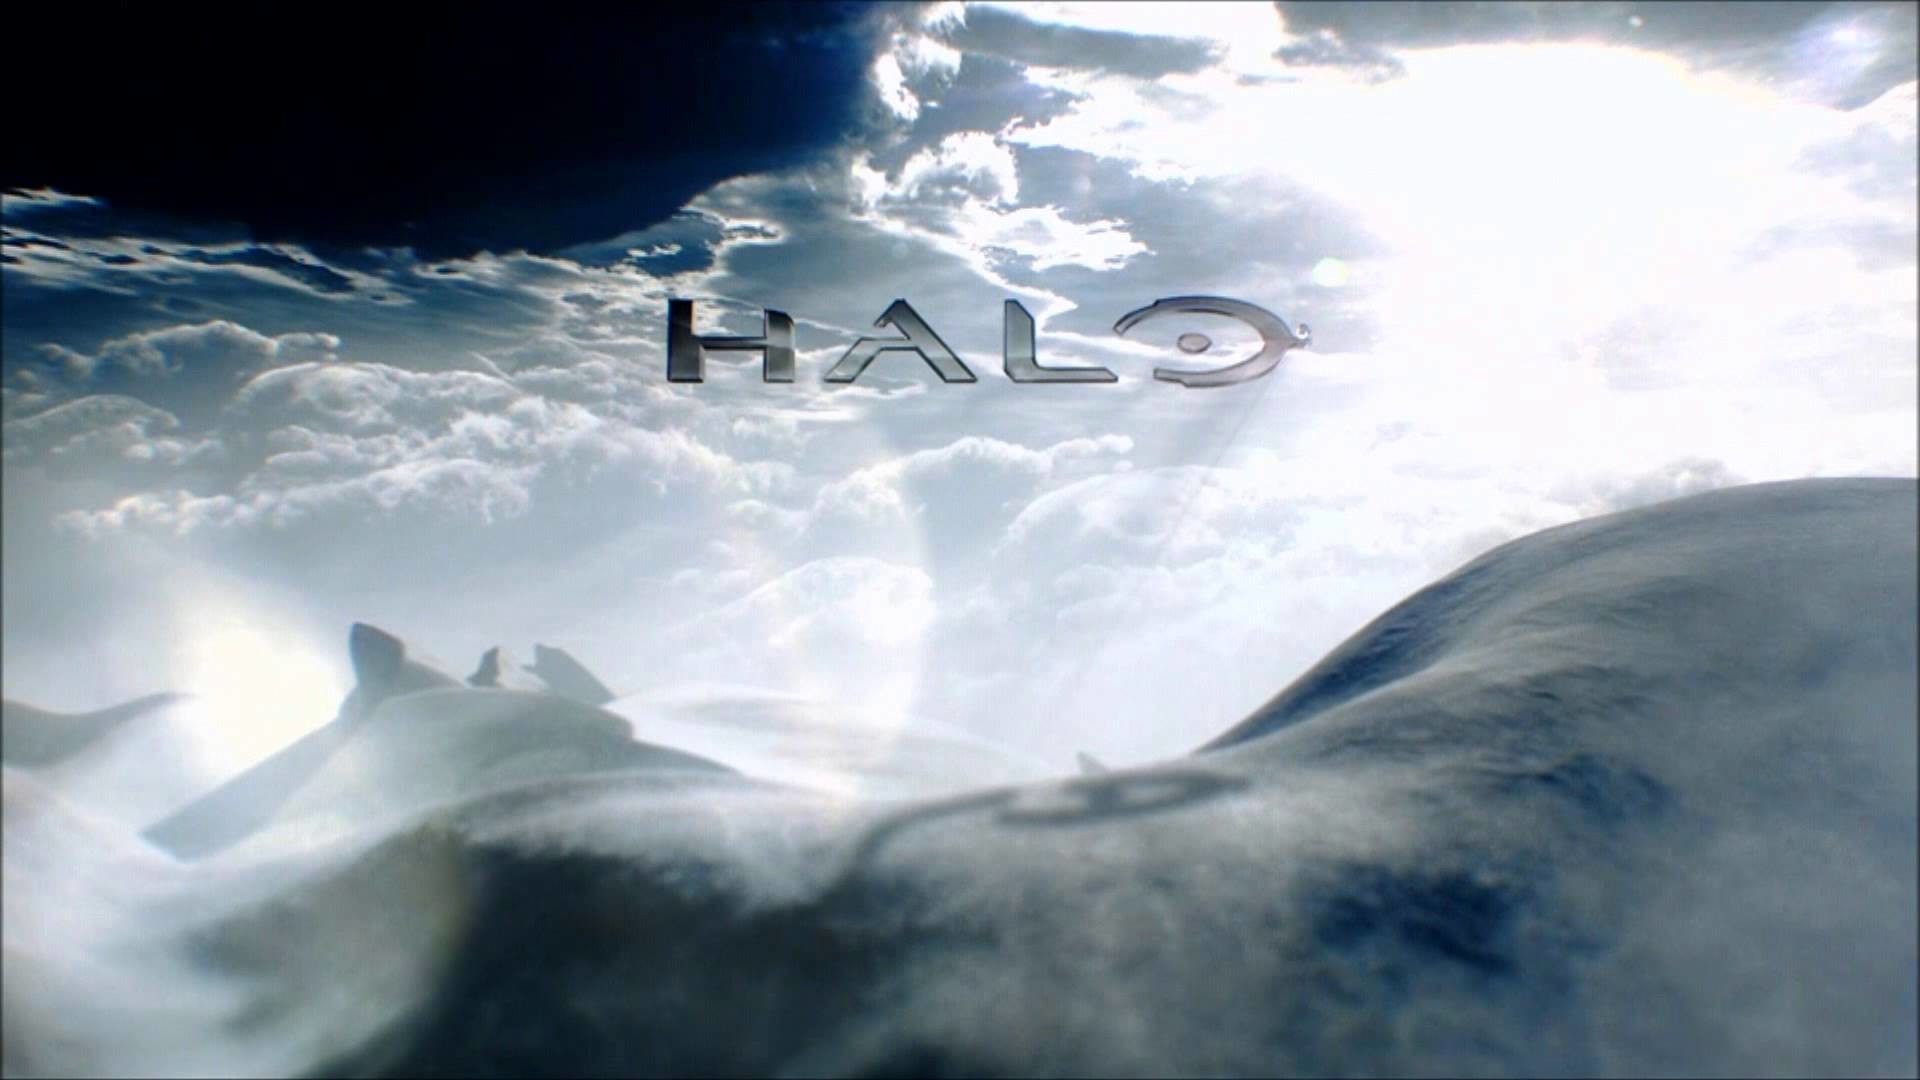 1920x1080 Halo 5 Teaser Trailer Xbox One - With reactions - YouTube